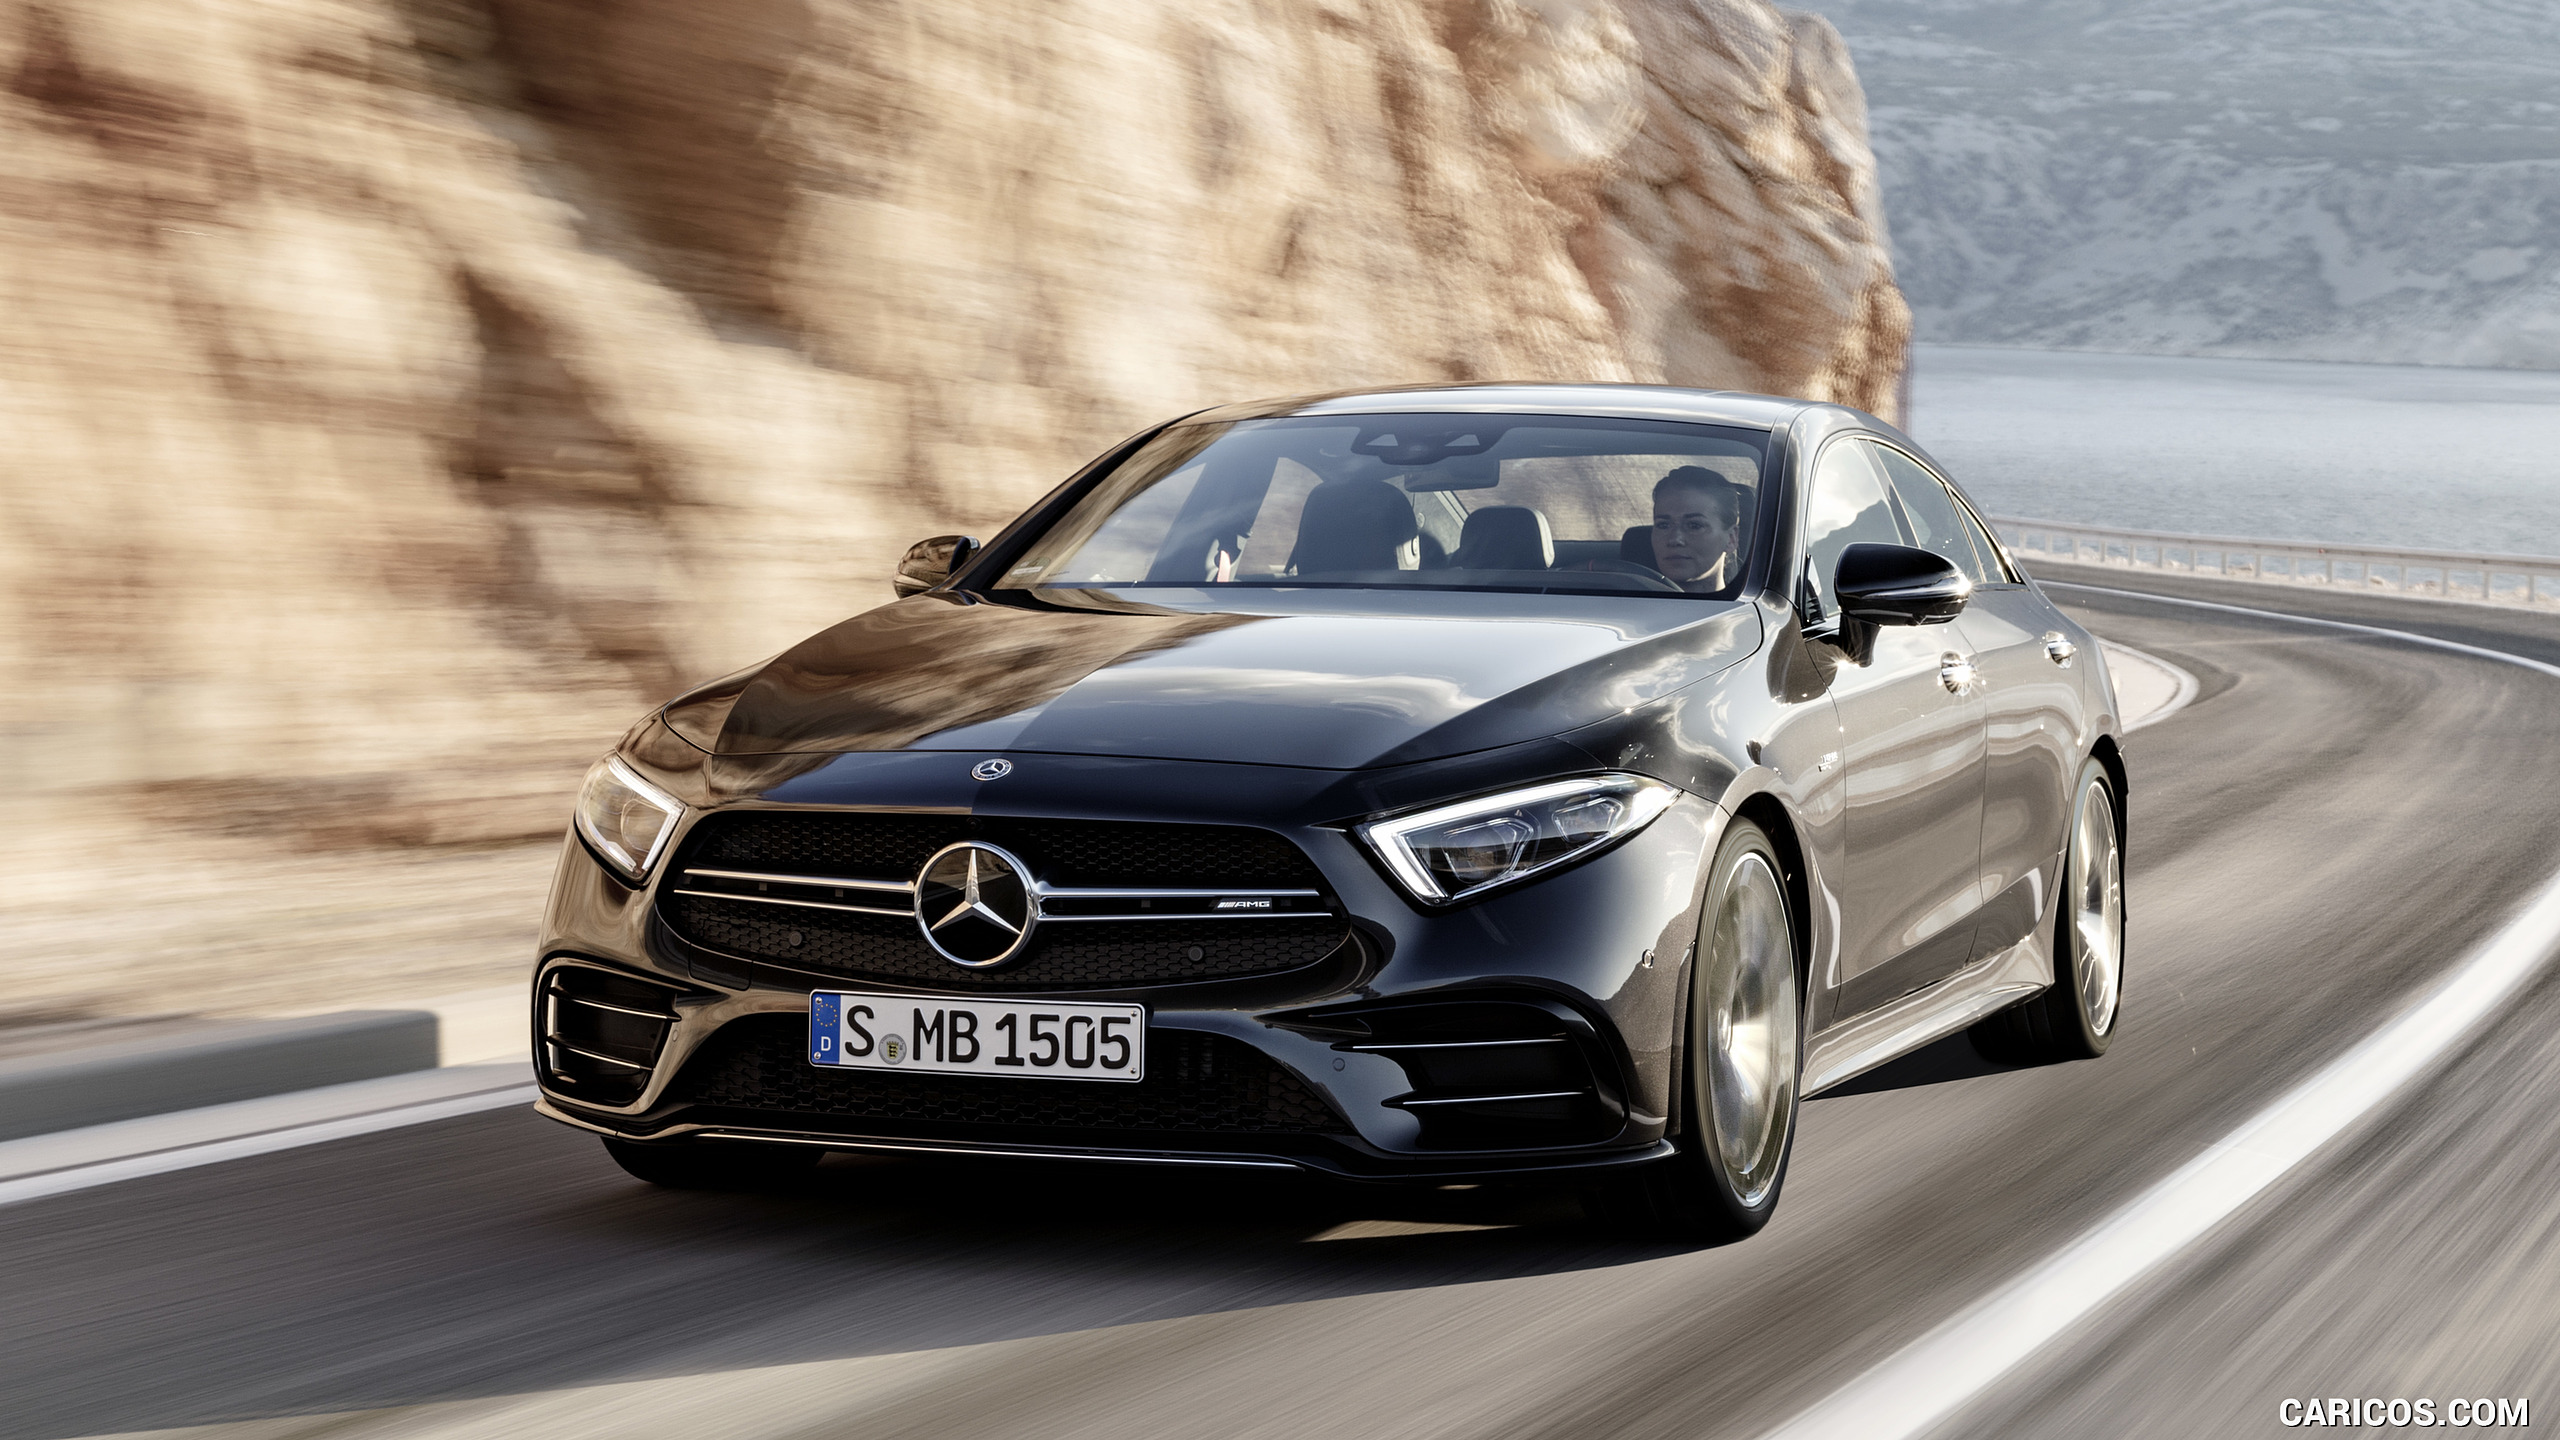 2019 Mercedes-AMG CLS 53 4MATIC+ - Front, #2 of 84